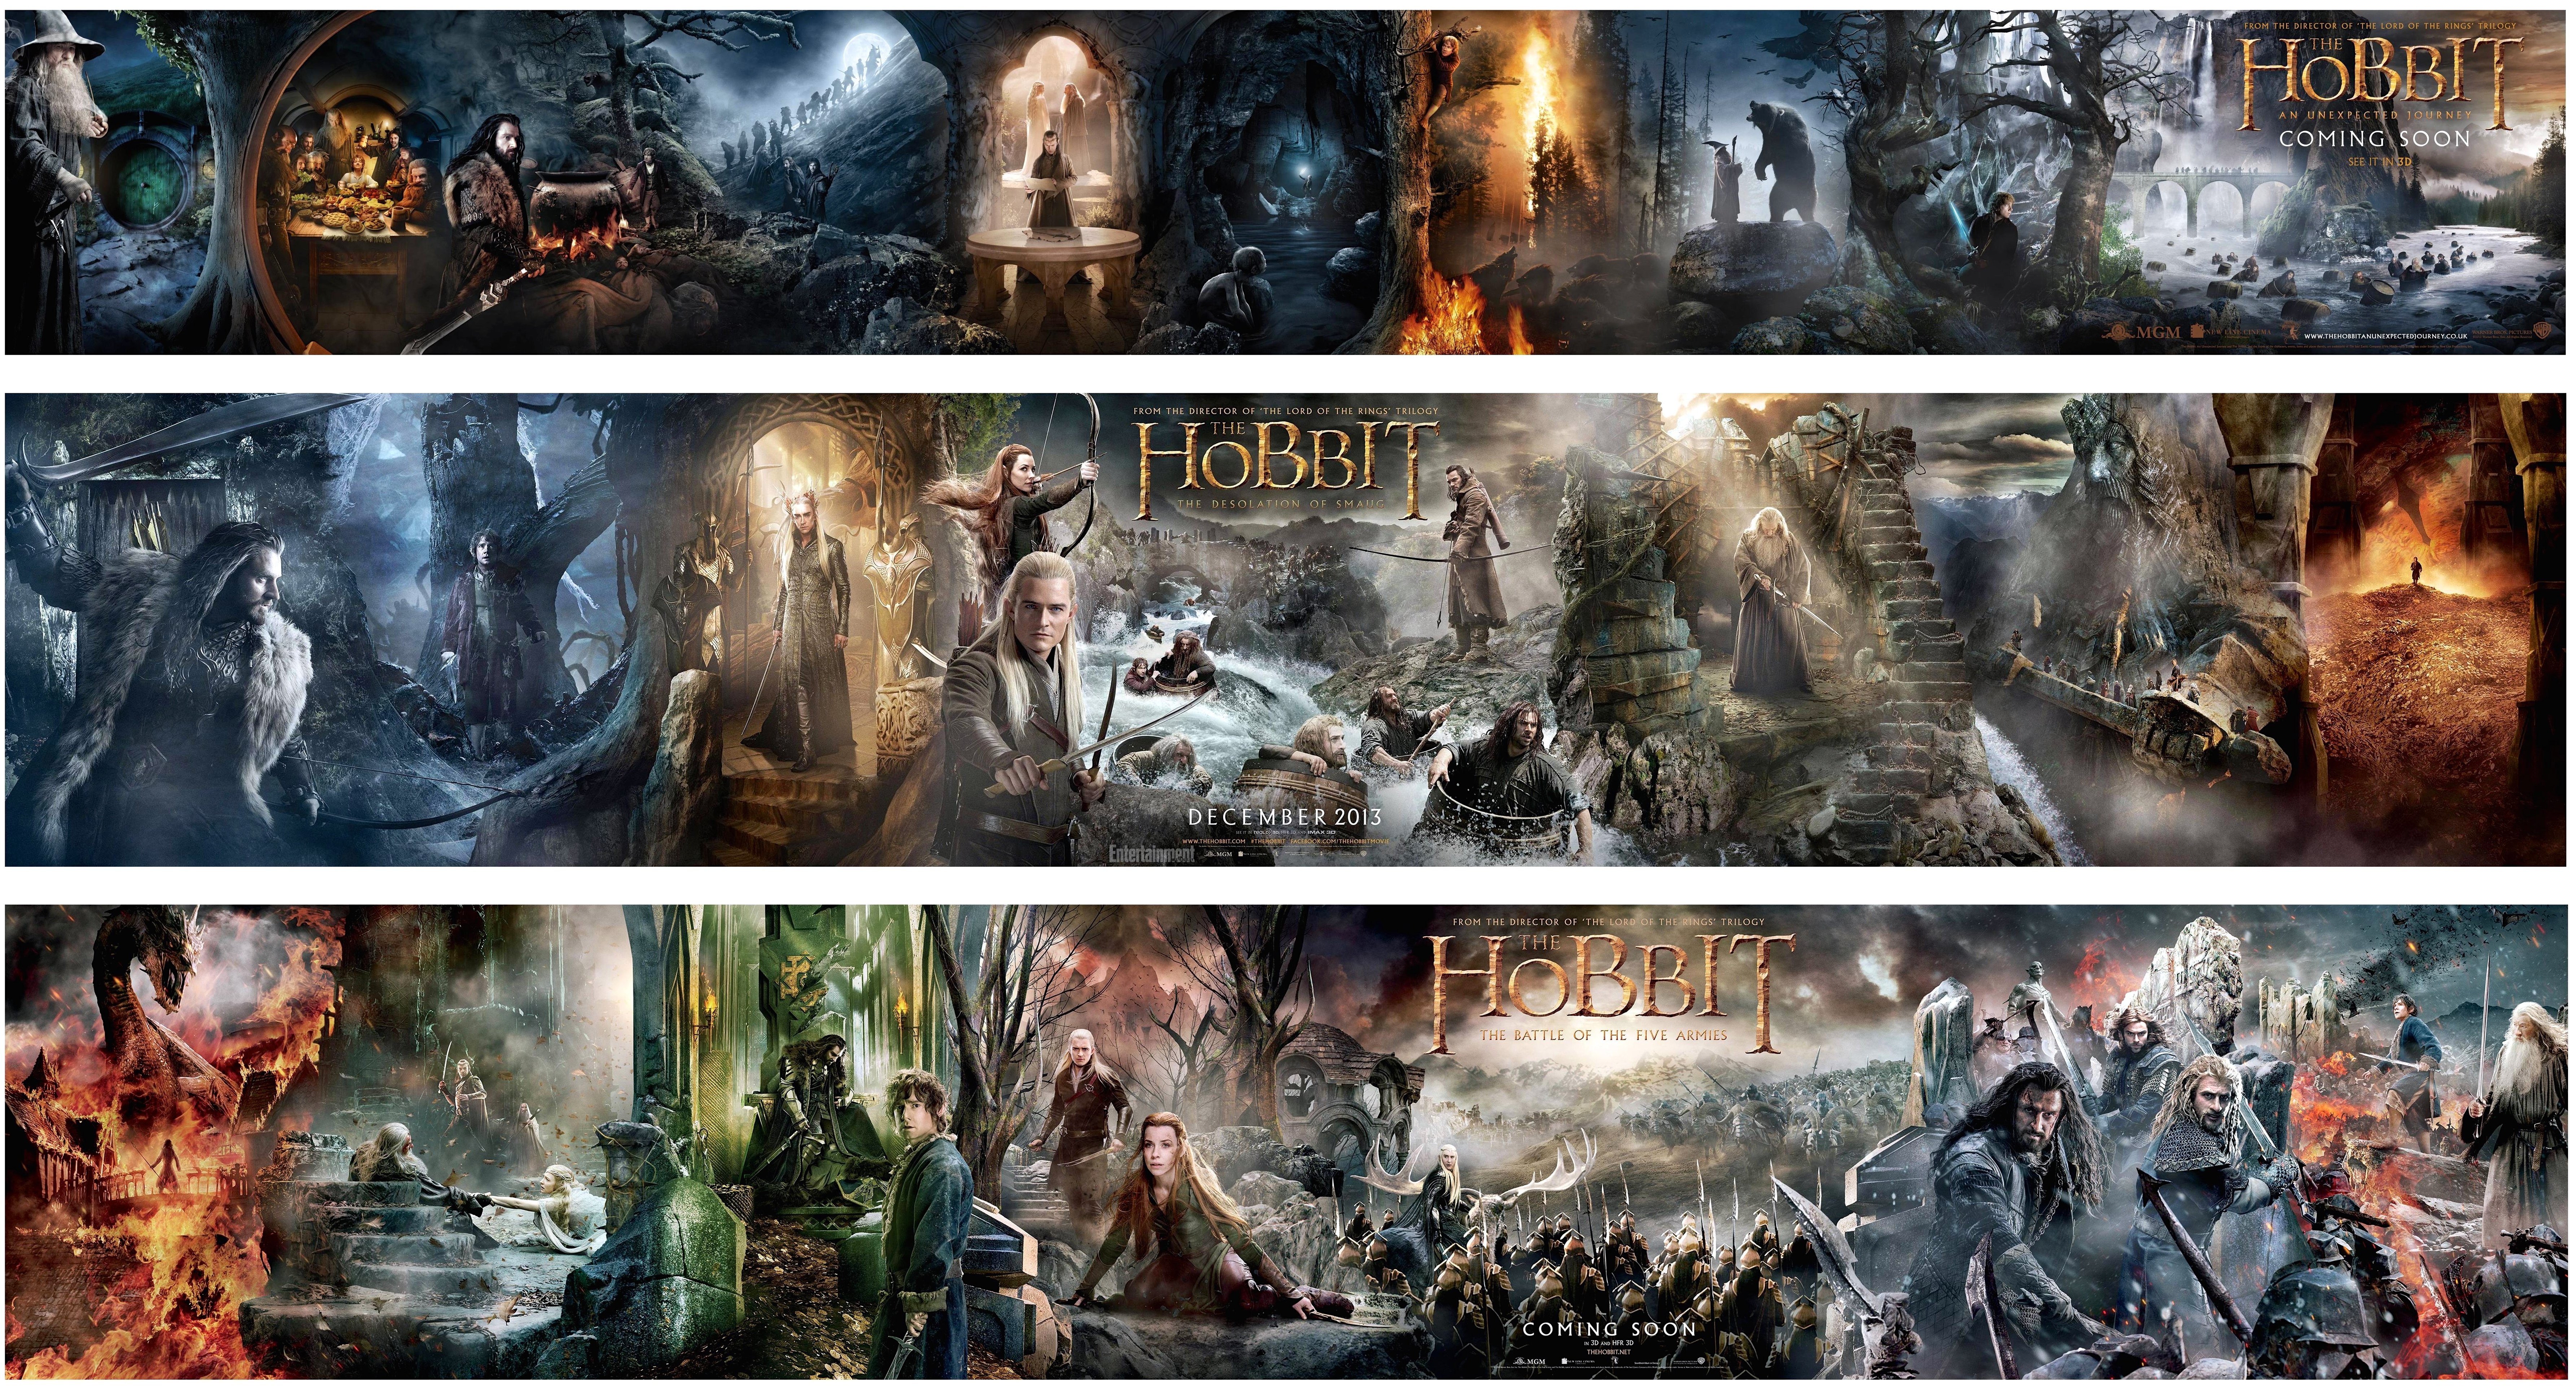 Lord, Lotr, Fantasy Wallpapers, Laptop, Armies, Battle - Lord Of The Rings  Hobbit Background - 7139x3844 Wallpaper 